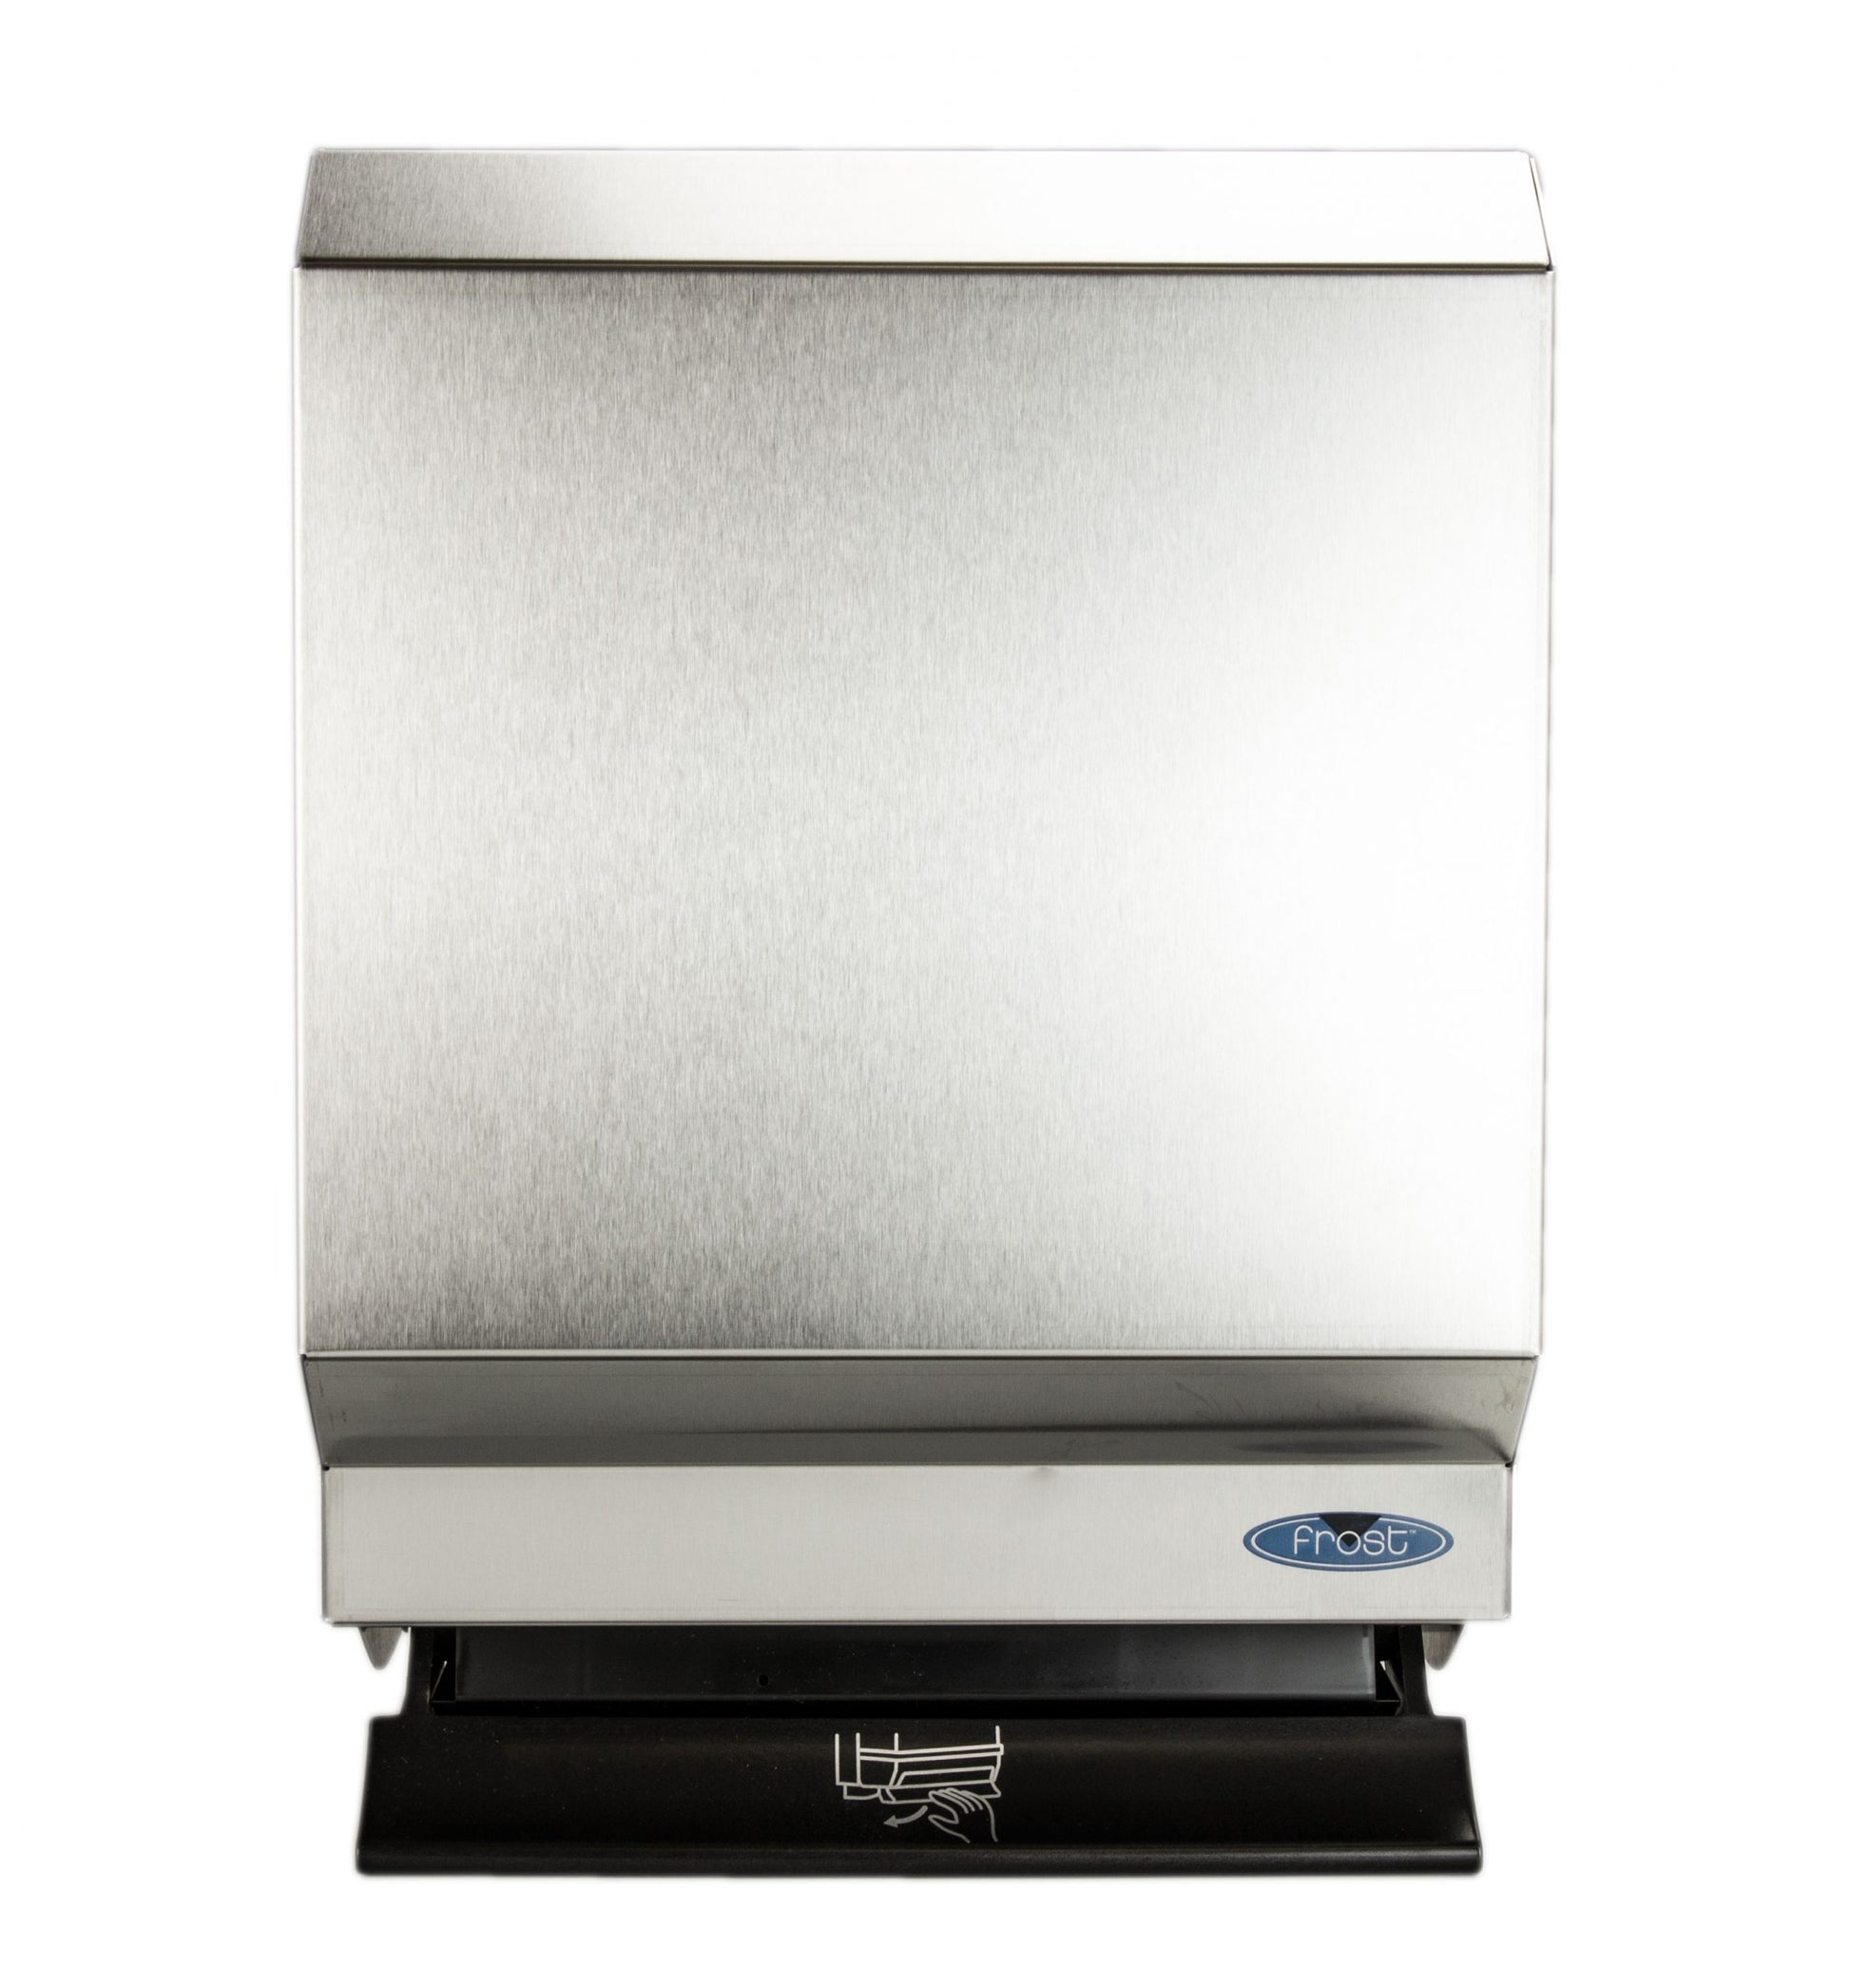 Frost Stainless Steel Paper Towel Dispenser Front view